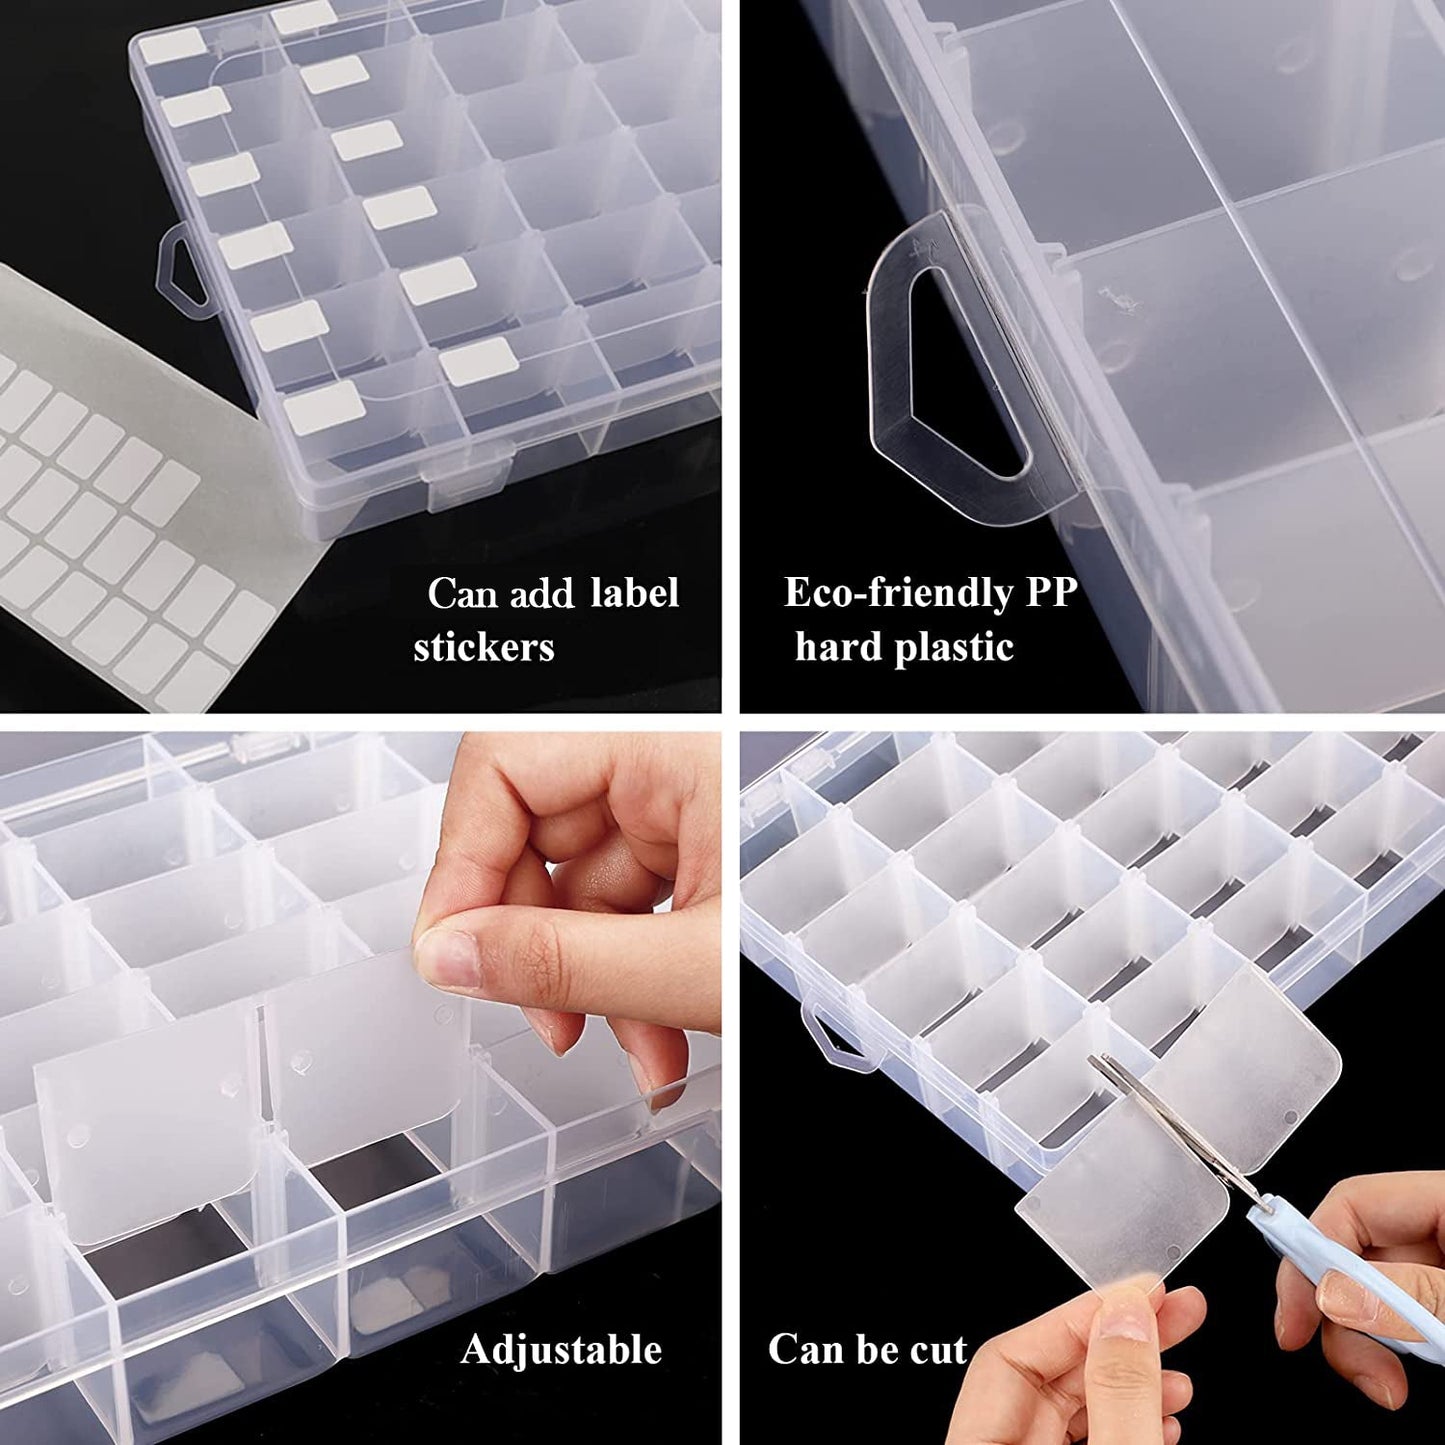 7673  36 Grids Clear Plastic Organizer Box with Adjustable Compartment Dividers, Jewellery Storage Organizer Collection Box (1 pc ) DeoDap